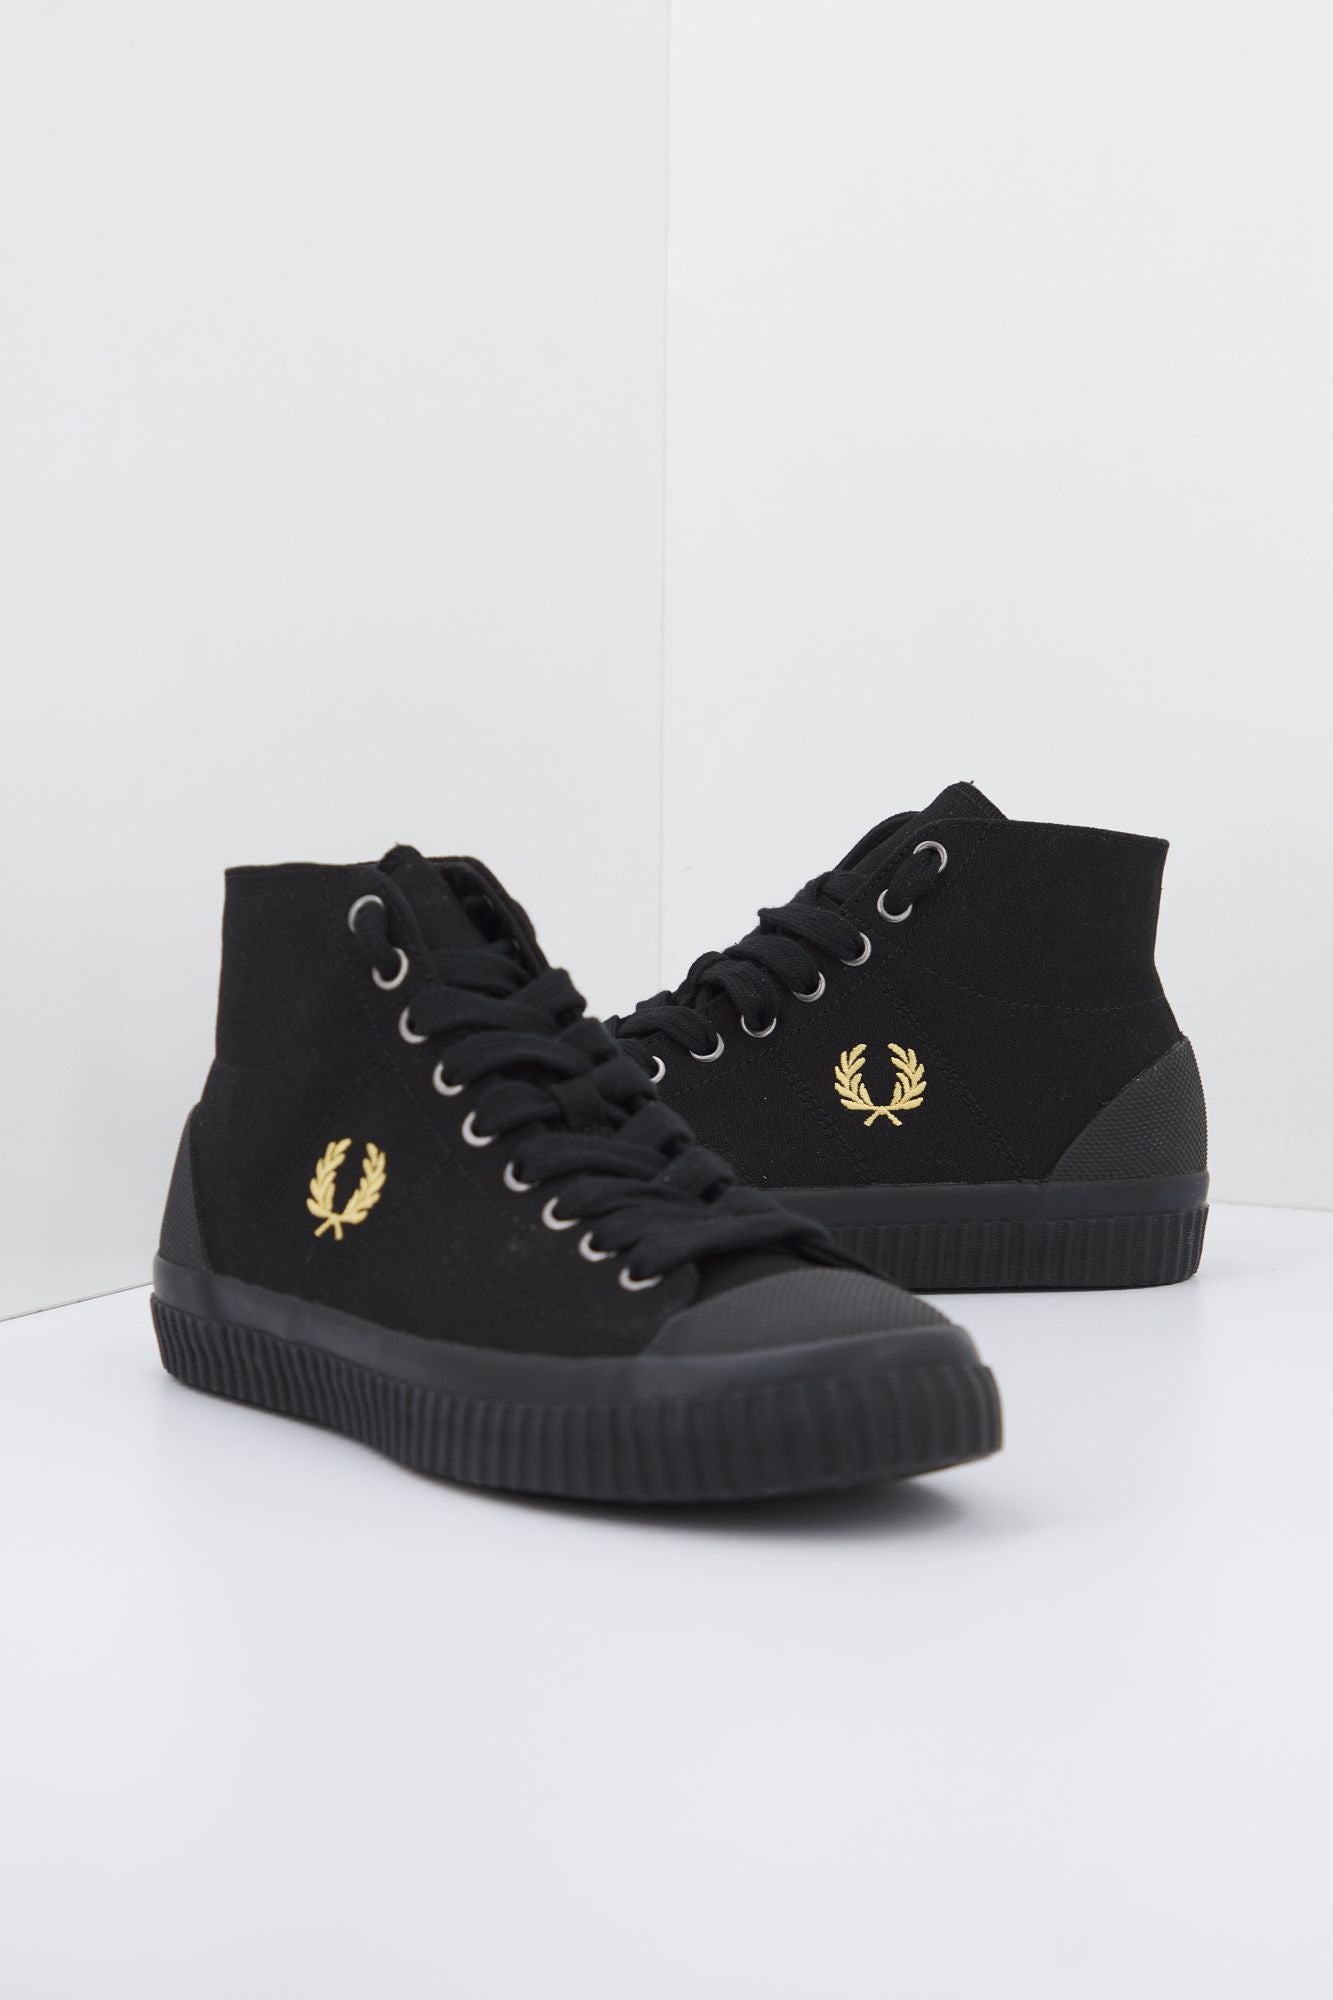 FRED PERRY B8110 en color NEGRO (1)